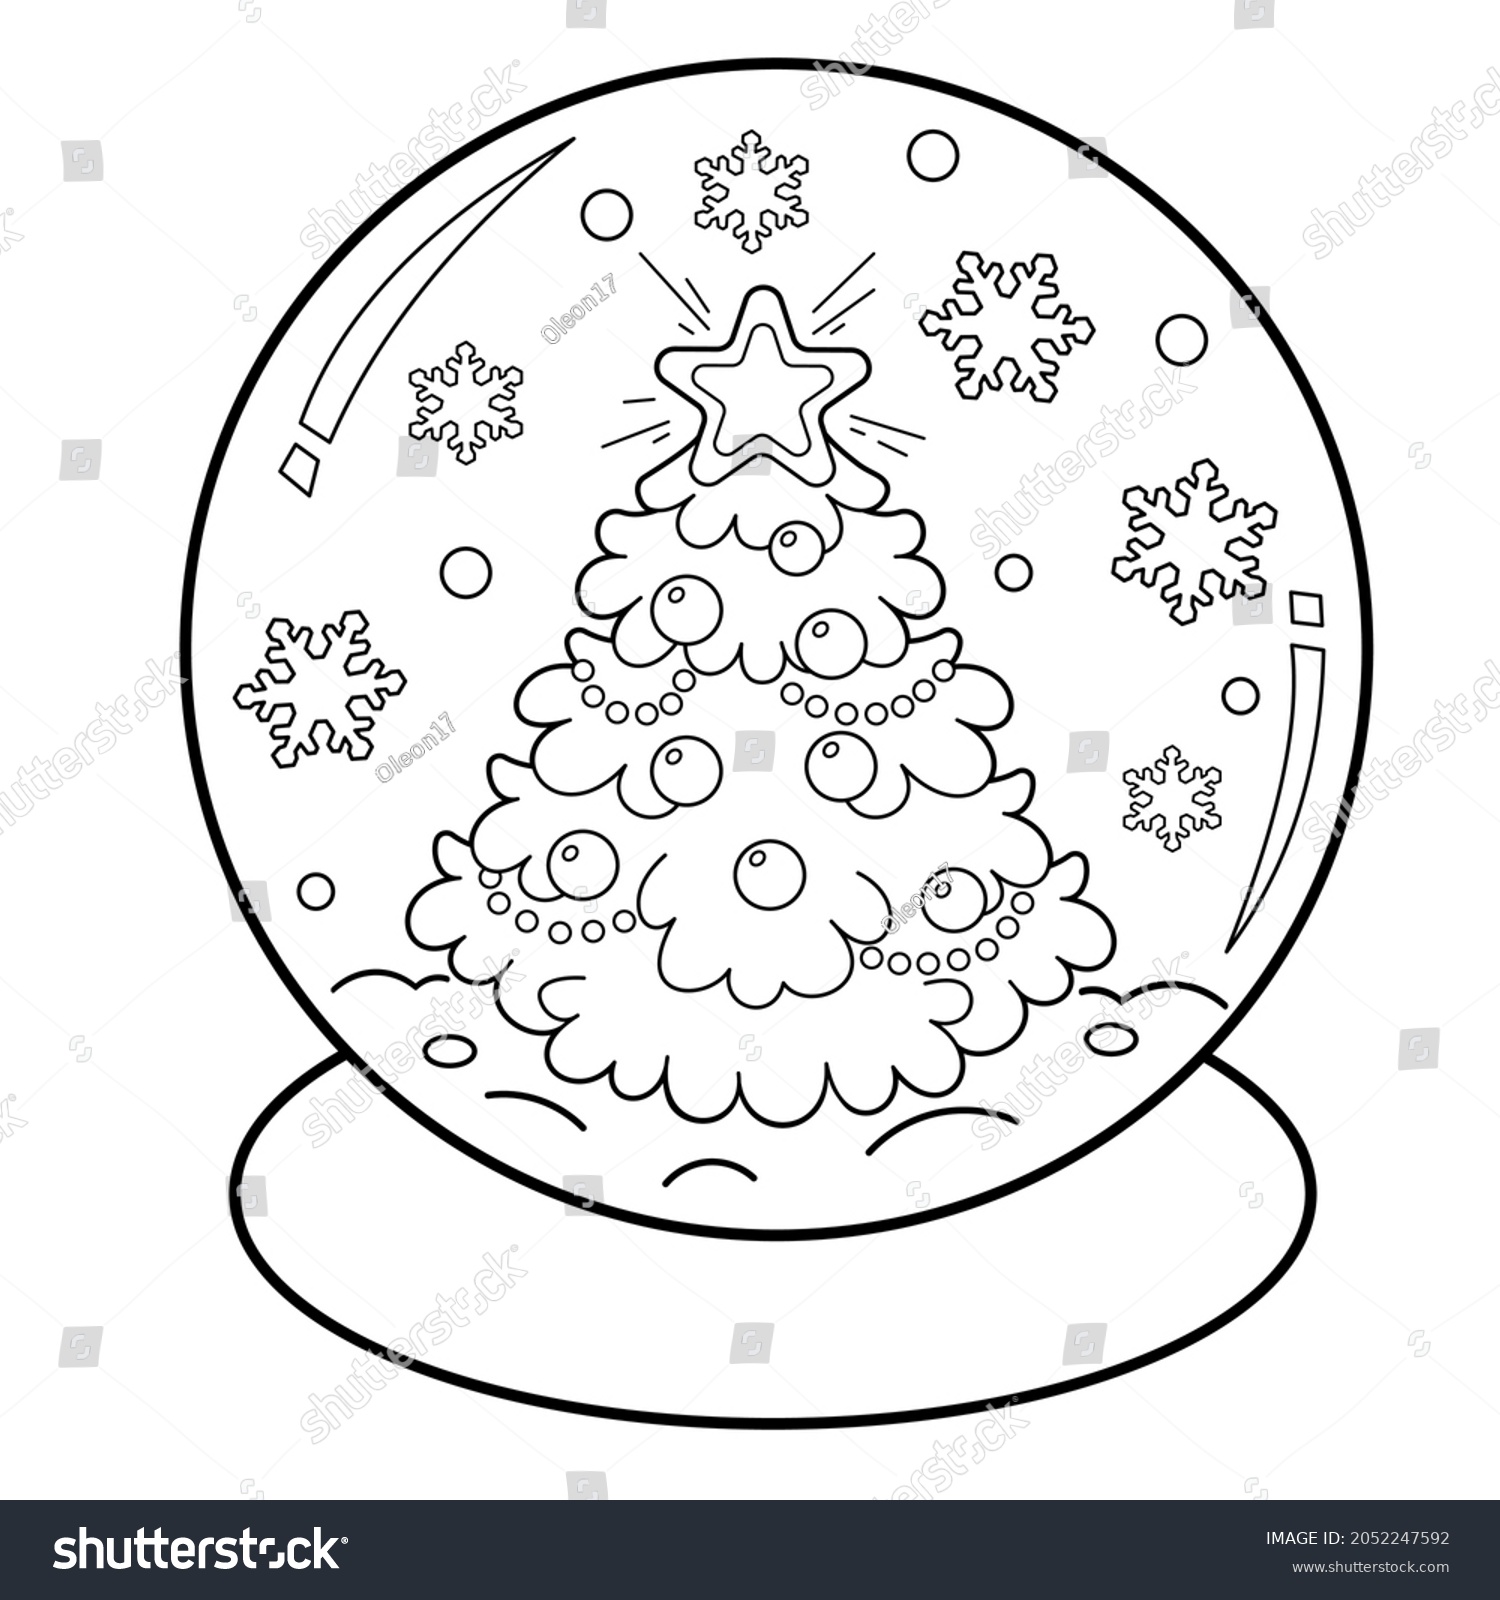 Coloring page outline snow globe christmas stock vector royalty free